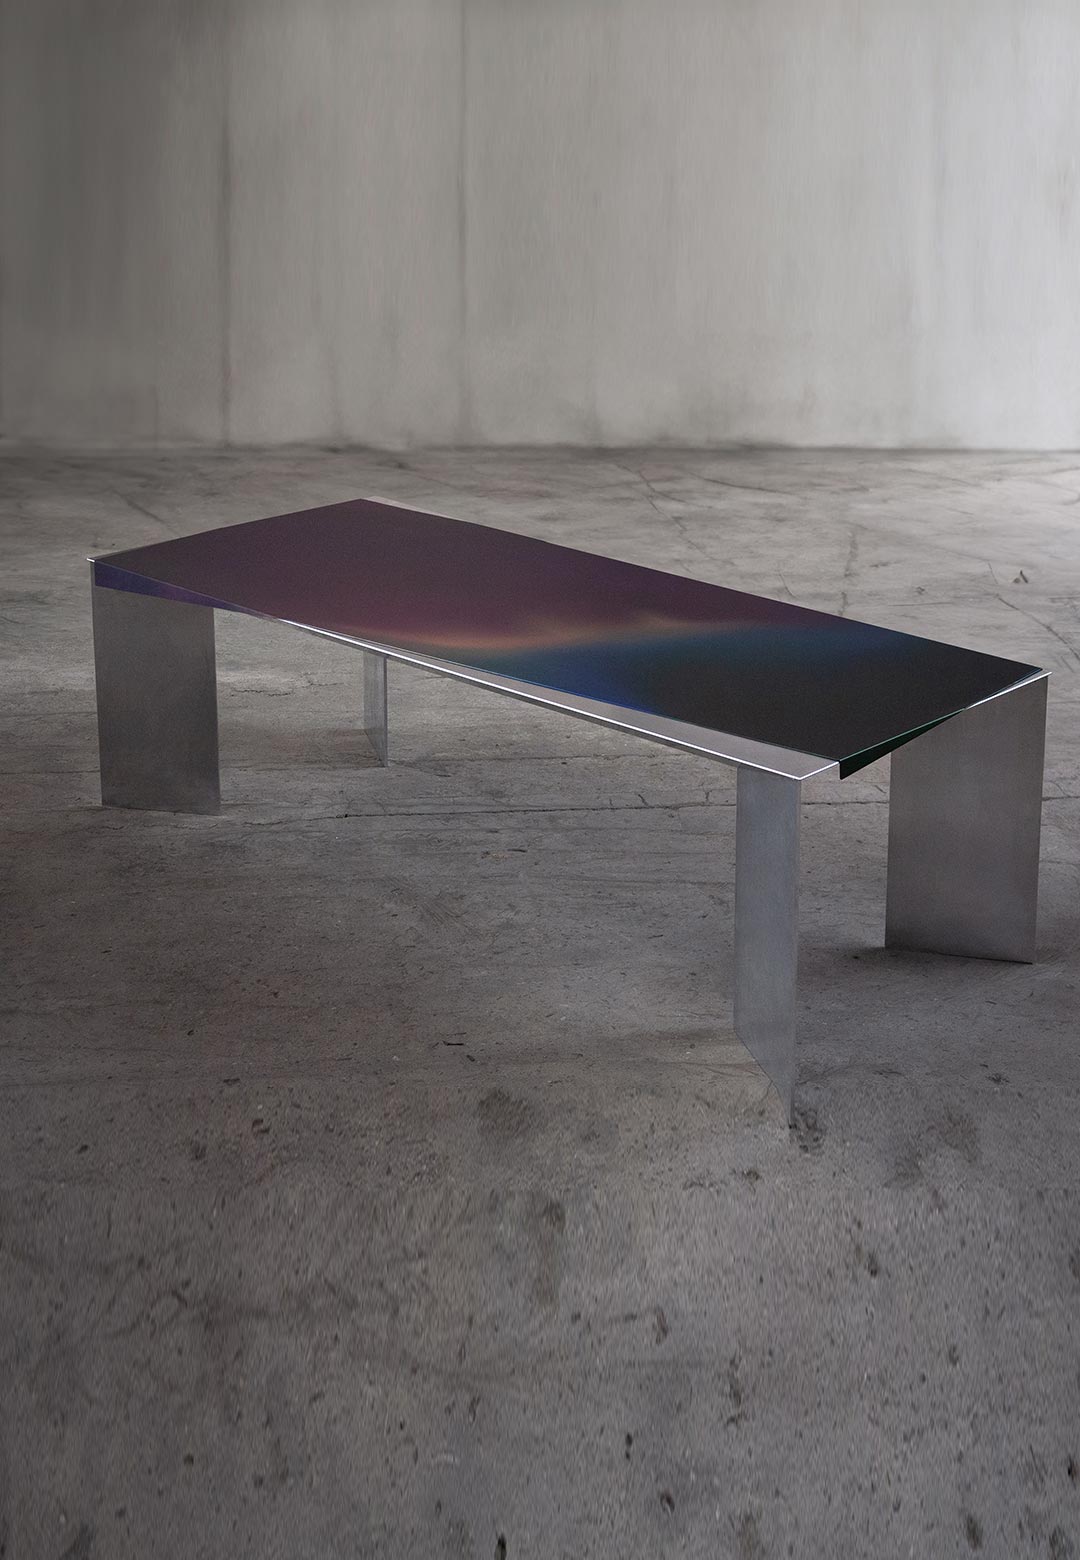 BUDDE reimagines aesthetics via a range of furniture and interior products